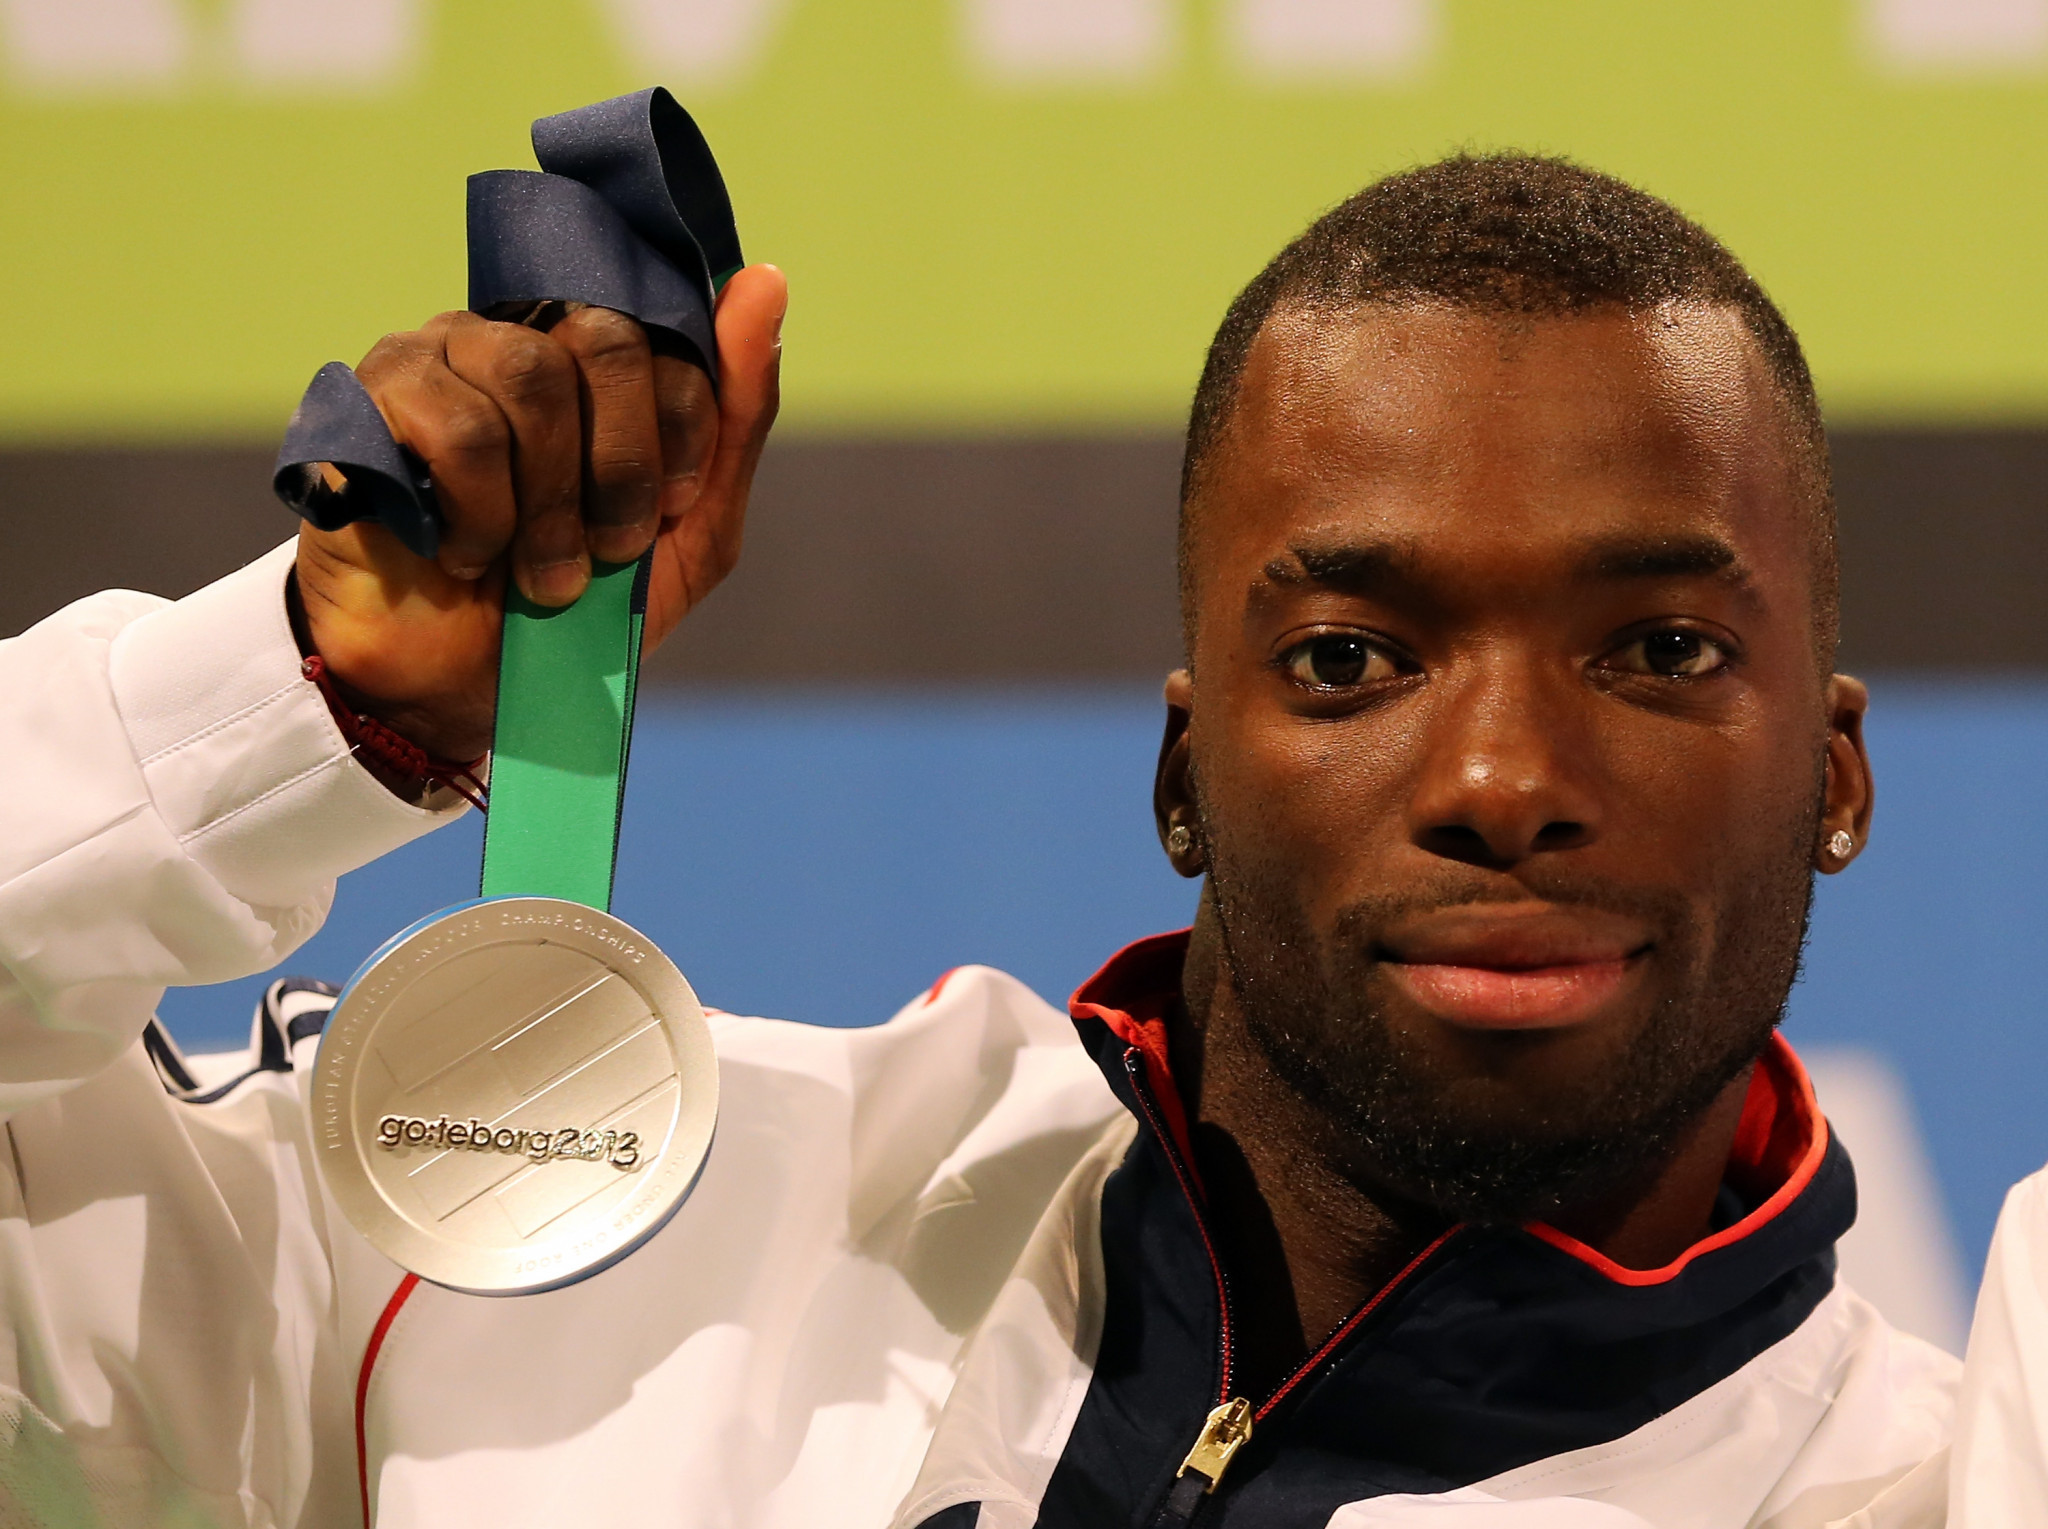 Britain's Nigel Levine won a silver medal in the 400m at the 2013 European Indoor Championships in Gothenburg ©Getty Images